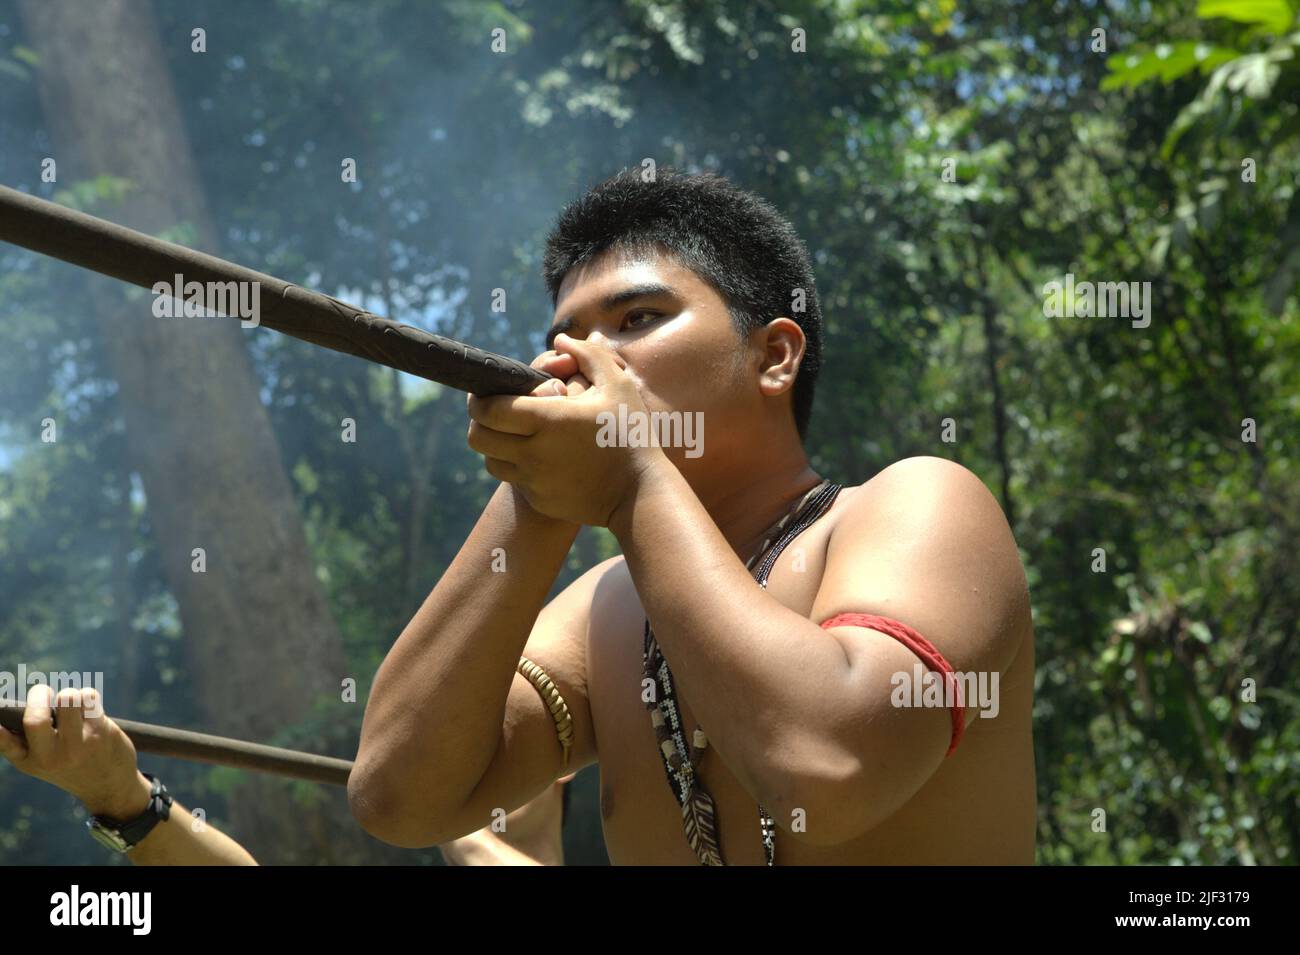 A tourism worker demonstrating an indigenous way of hunting with blowgun at Mari Mari Cultural Village, a village that is designed to showcase the cultures of five ethnic groups of Sabah—a Malaysian state in North Borneo, which is located on the outskirts of Kota Kinabalu in Sabah, Malaysia. Stock Photo